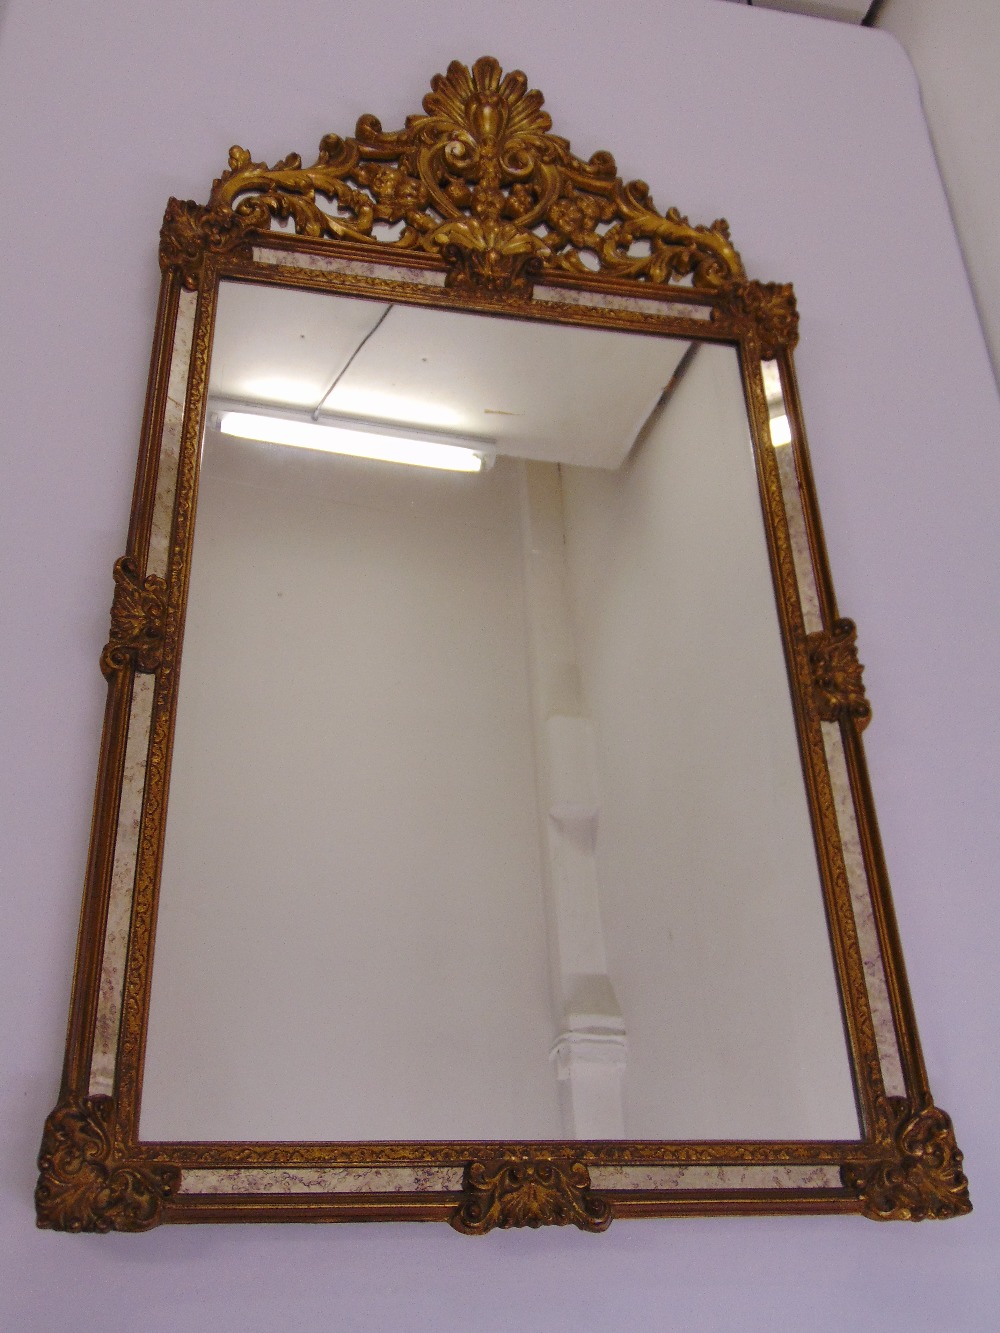 A decorative rectangular gilded wooden wall mirror surmounted by a pierced and carved floral design